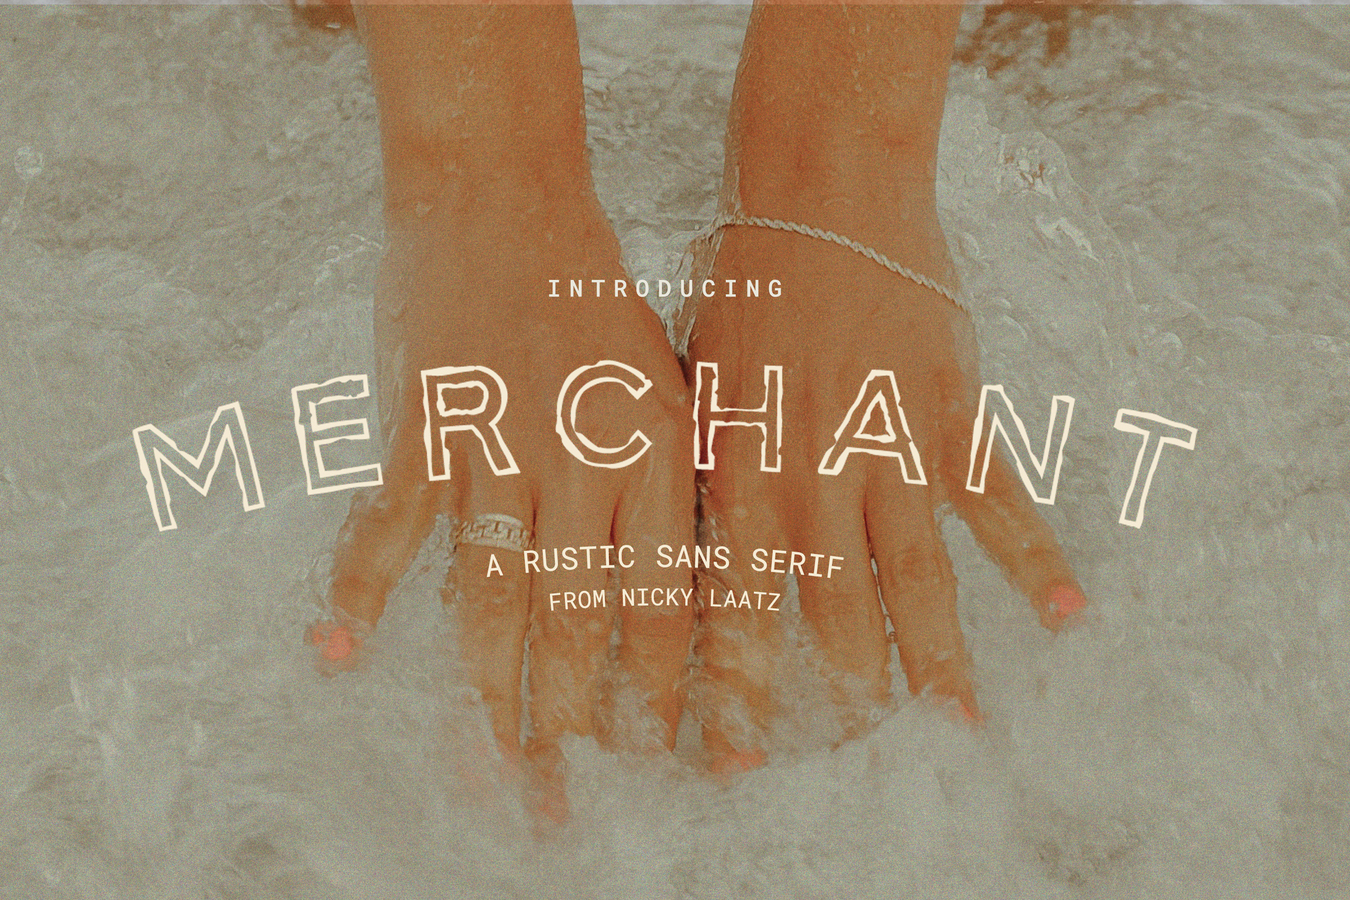 MERCHANT - A RUSTIC SANS main product image by Nicky Laatz